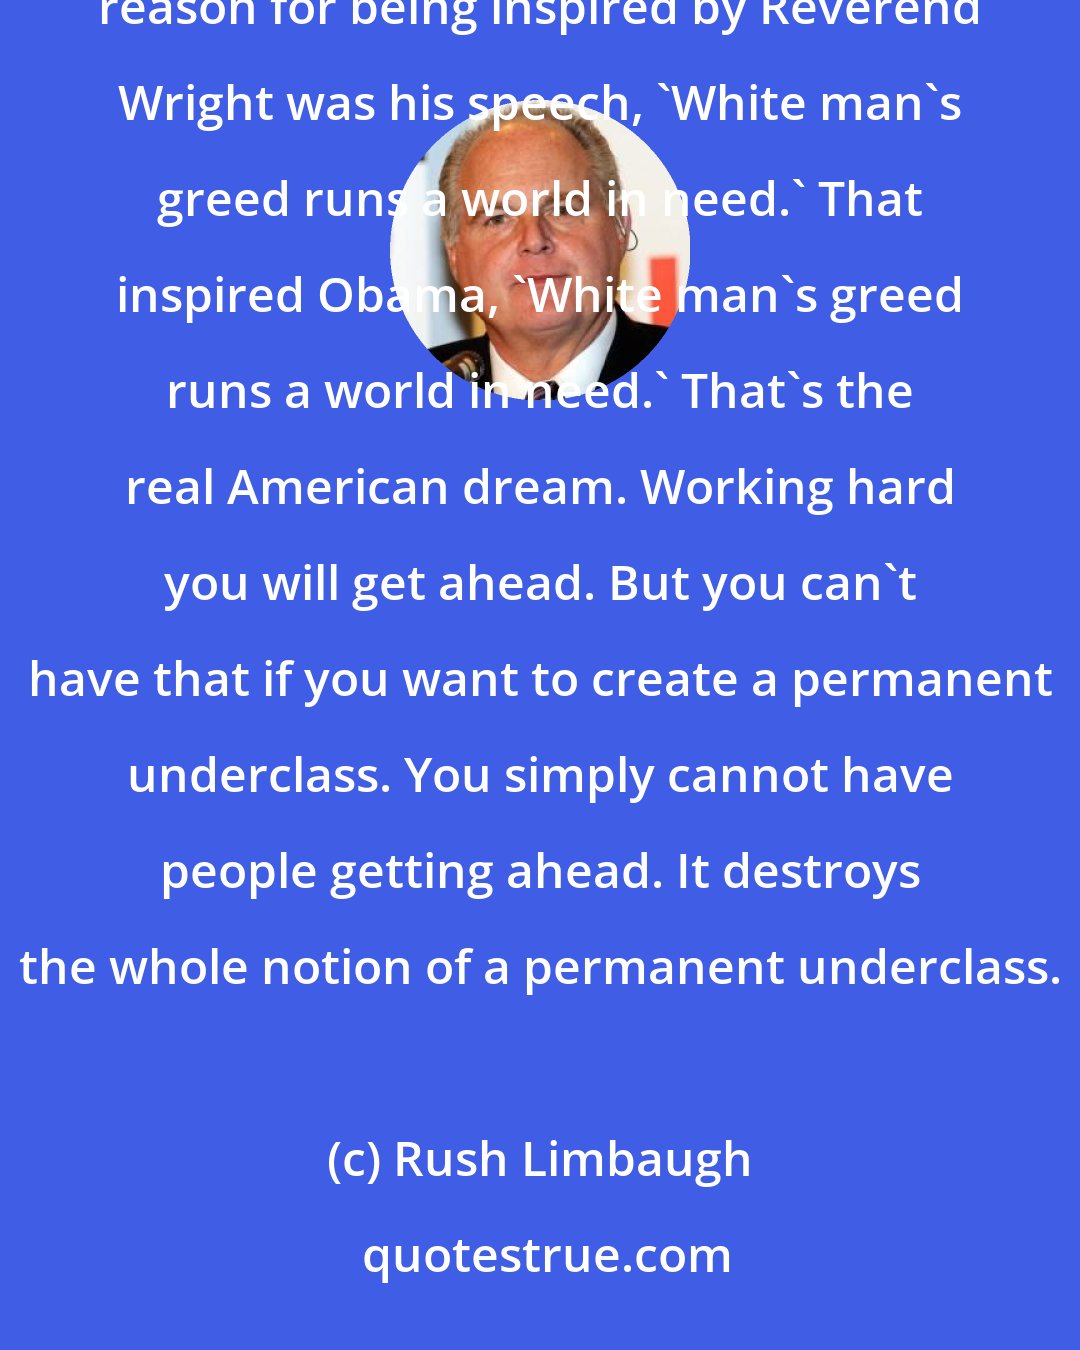 Rush Limbaugh: Our country, our economy - don't doubt me on this - our economy is based on capitalism. Barack Obama's stated reason for being inspired by Reverend Wright was his speech, 'White man's greed runs a world in need.' That inspired Obama, 'White man's greed runs a world in need.' That's the real American dream. Working hard you will get ahead. But you can't have that if you want to create a permanent underclass. You simply cannot have people getting ahead. It destroys the whole notion of a permanent underclass.